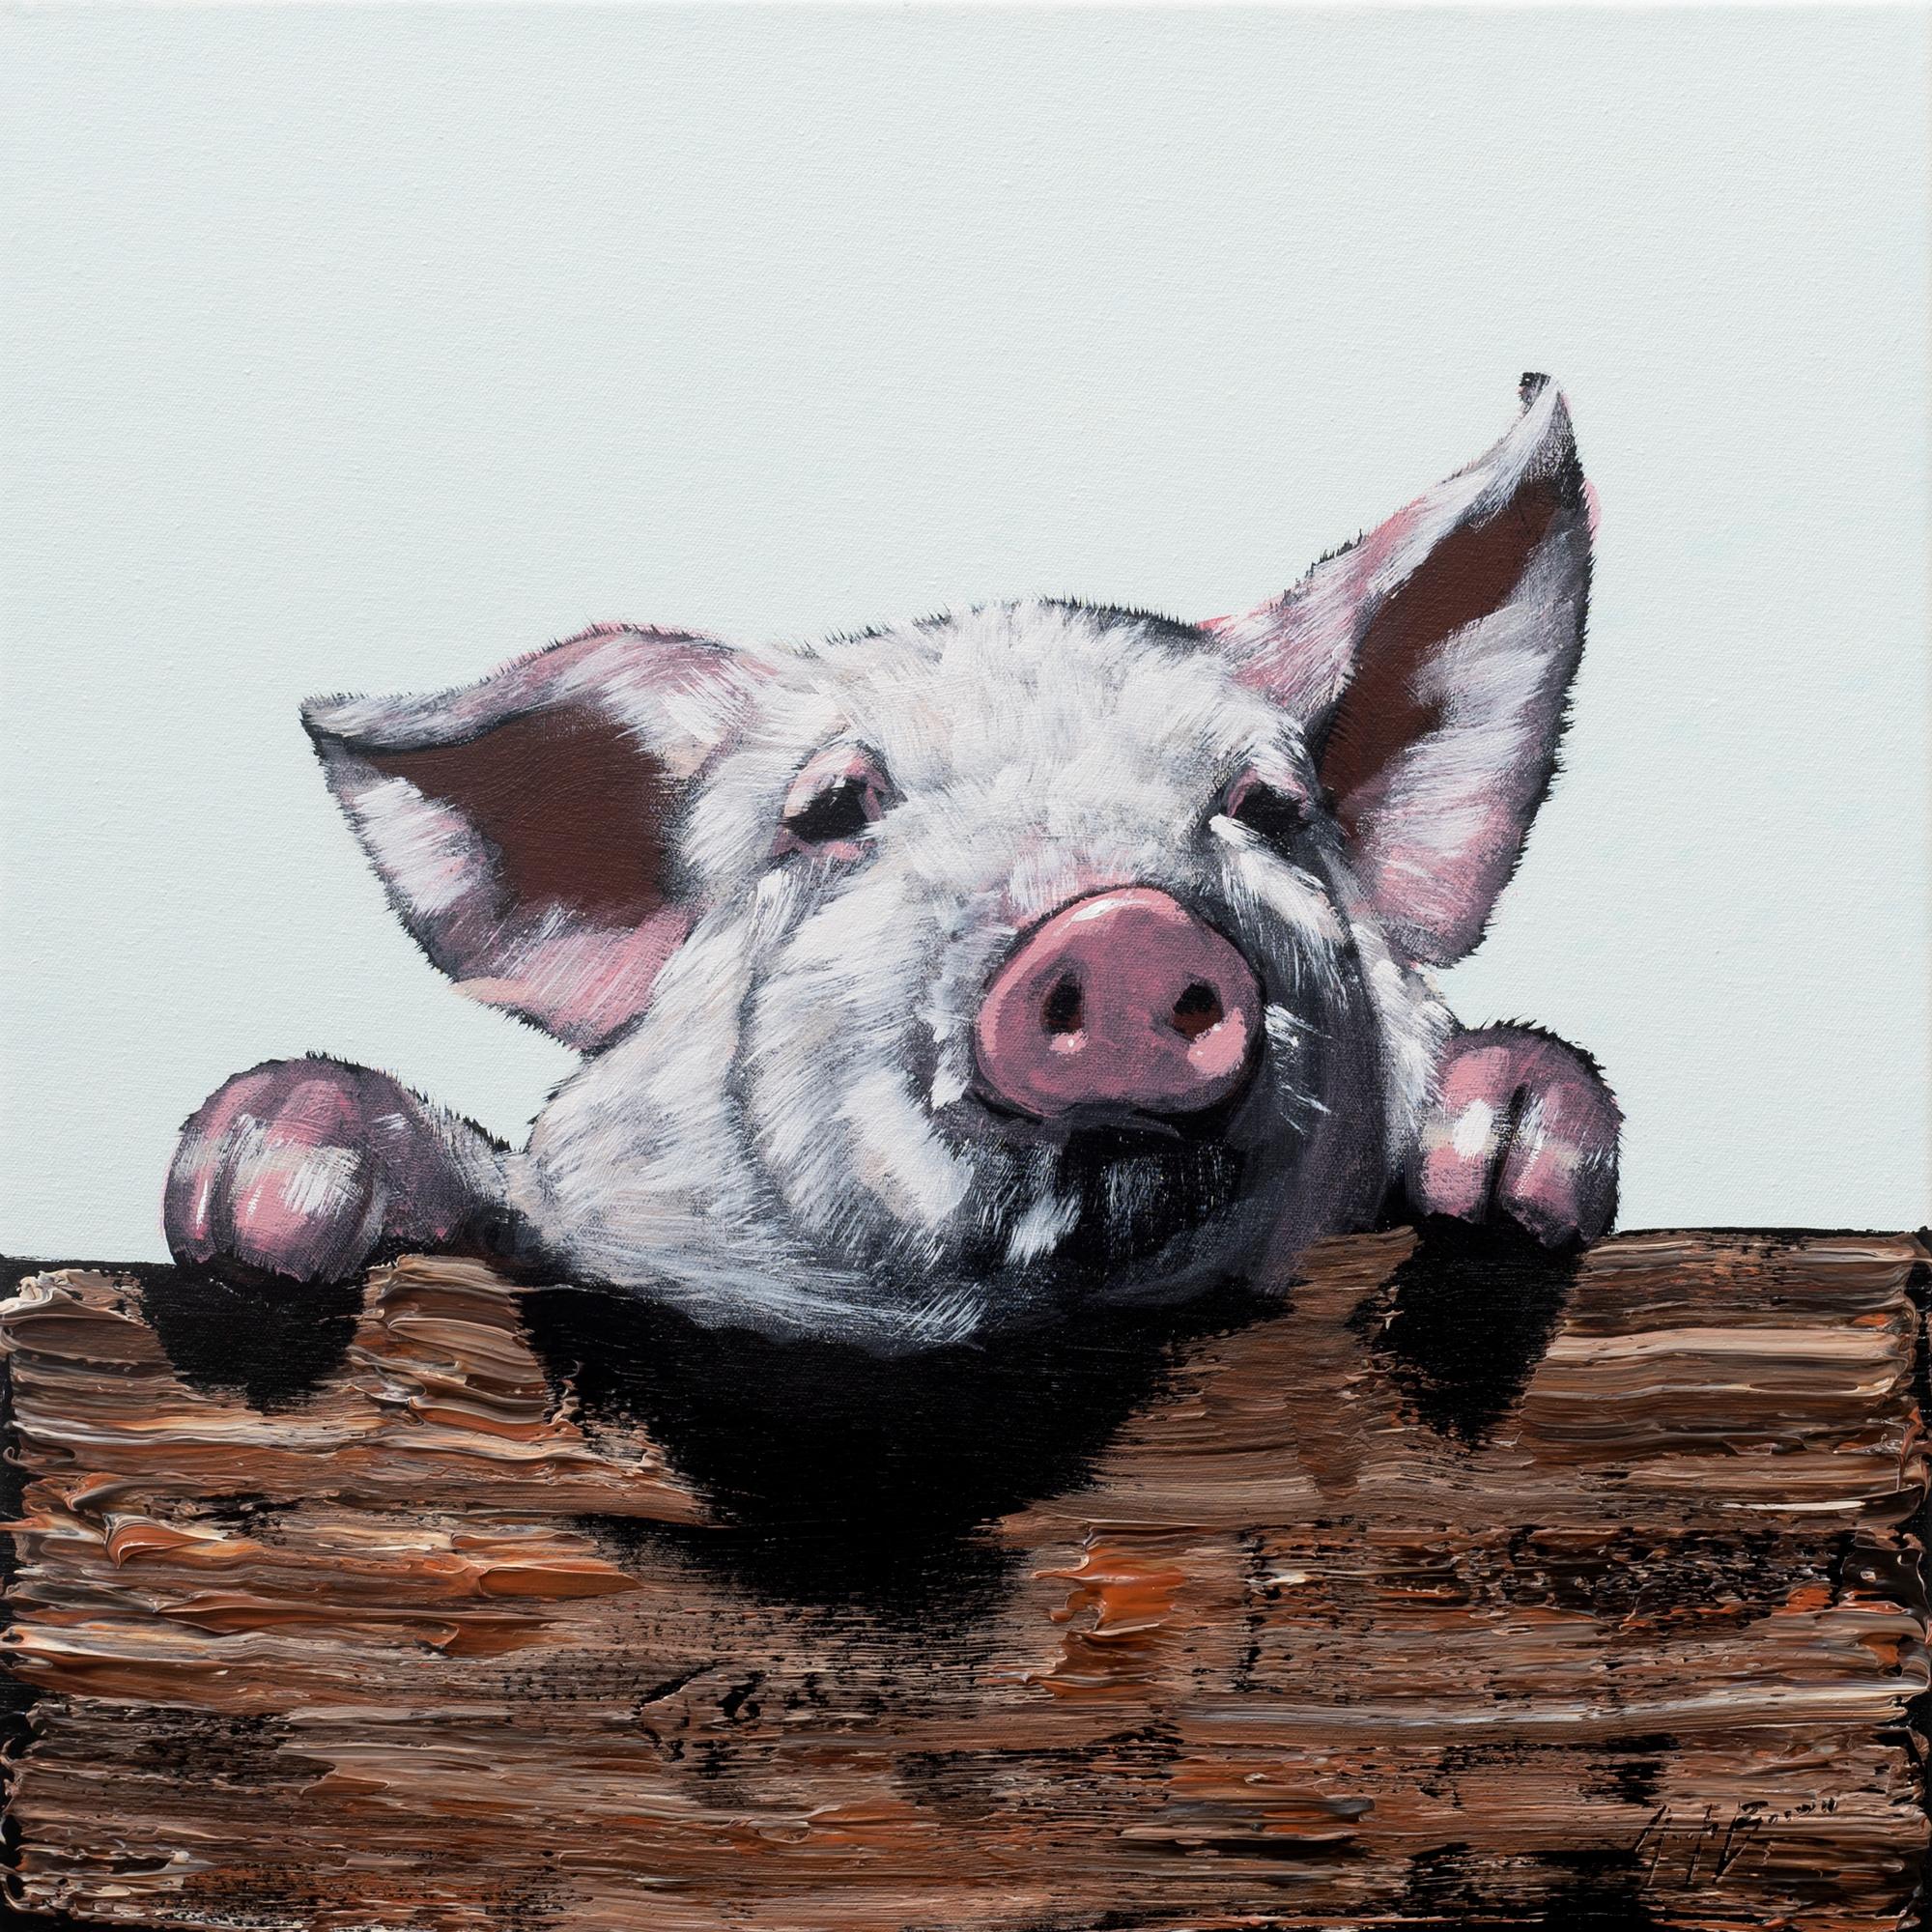 Pig on Fence 3 - Painting by Josh Brown